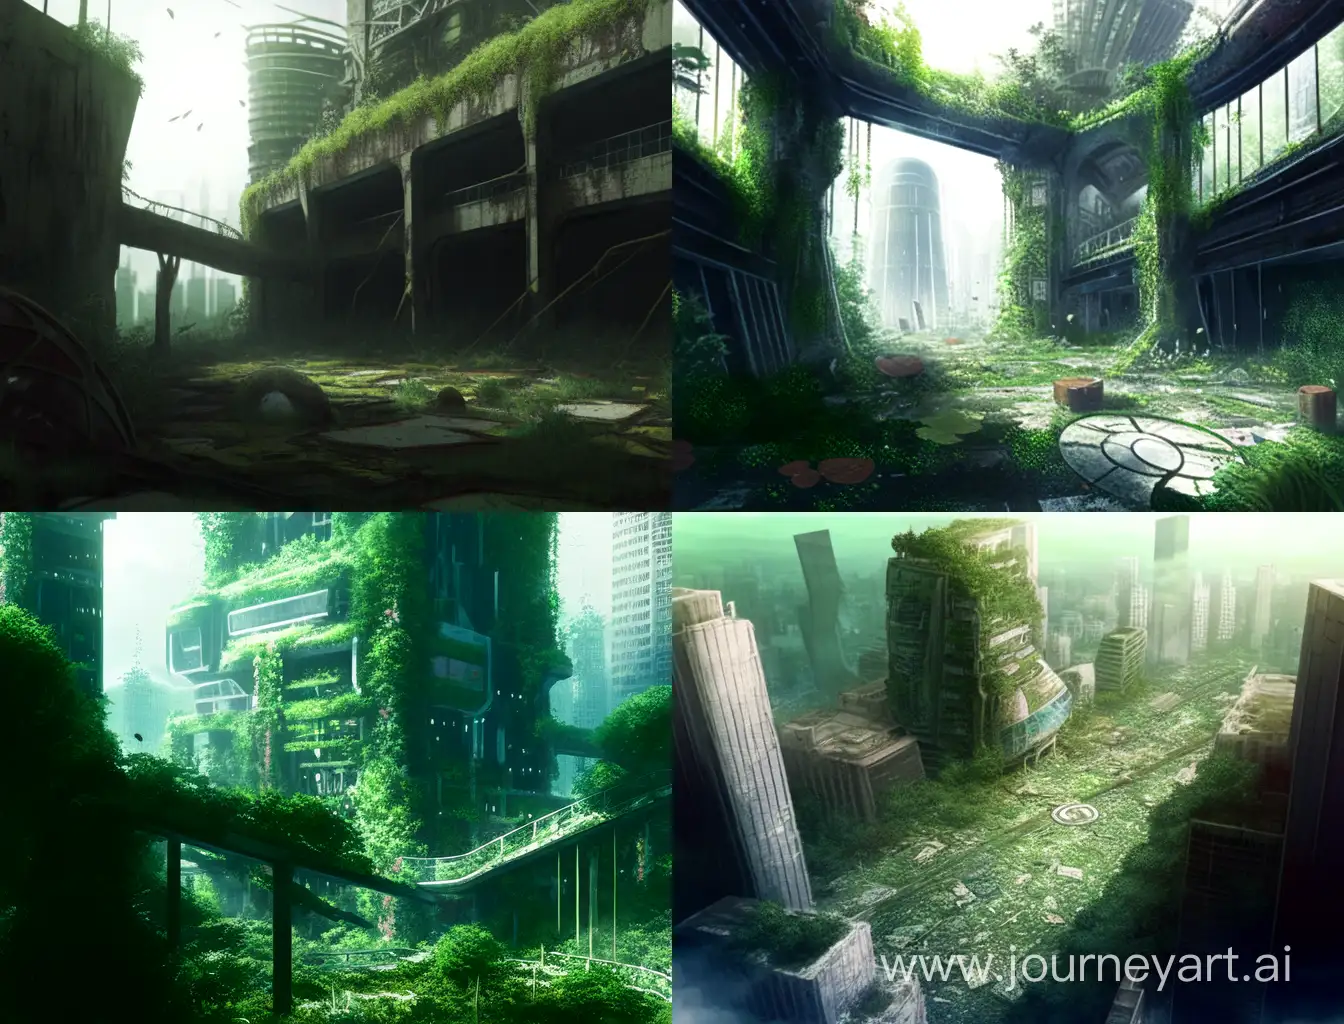 Eerie-Future-Dystopia-Abandoned-Cityscape-in-Green-Hues